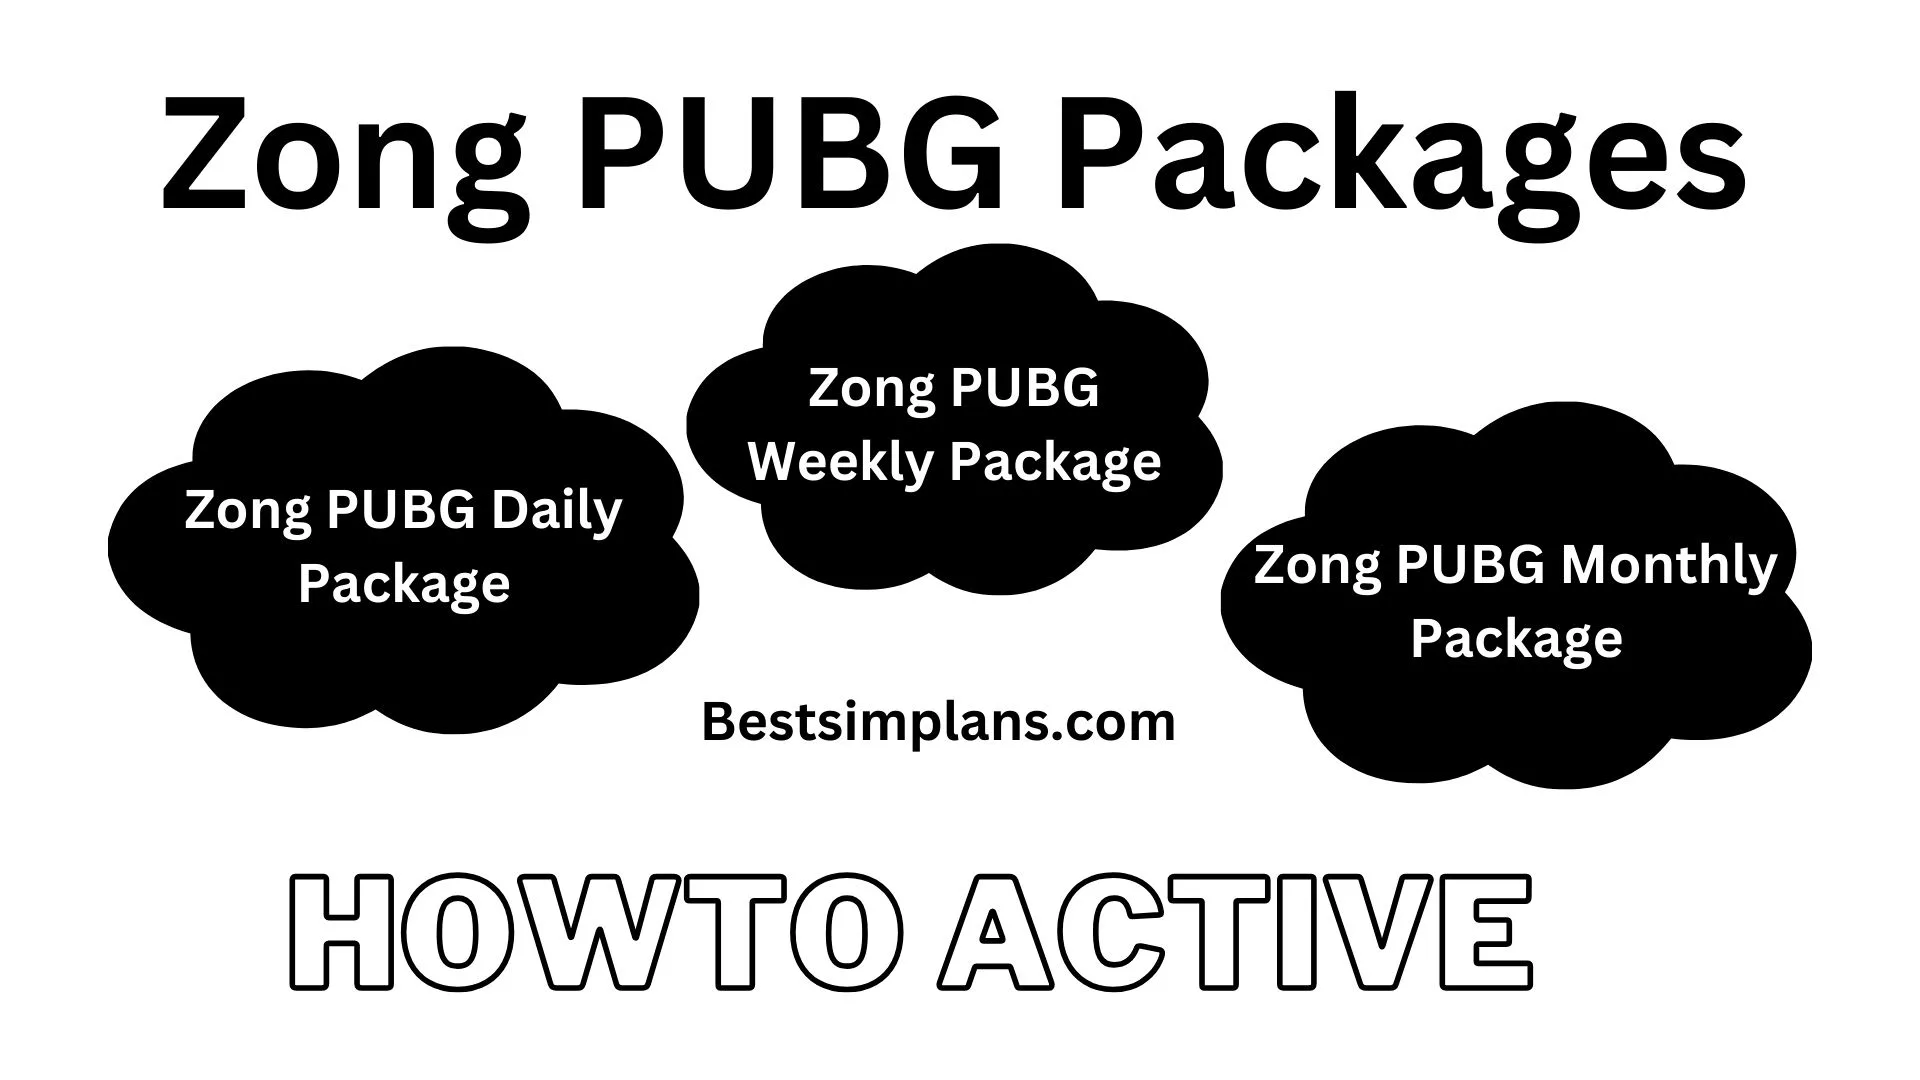 Zong PUBG Packages 1 Day, 7 Day & 30 Day